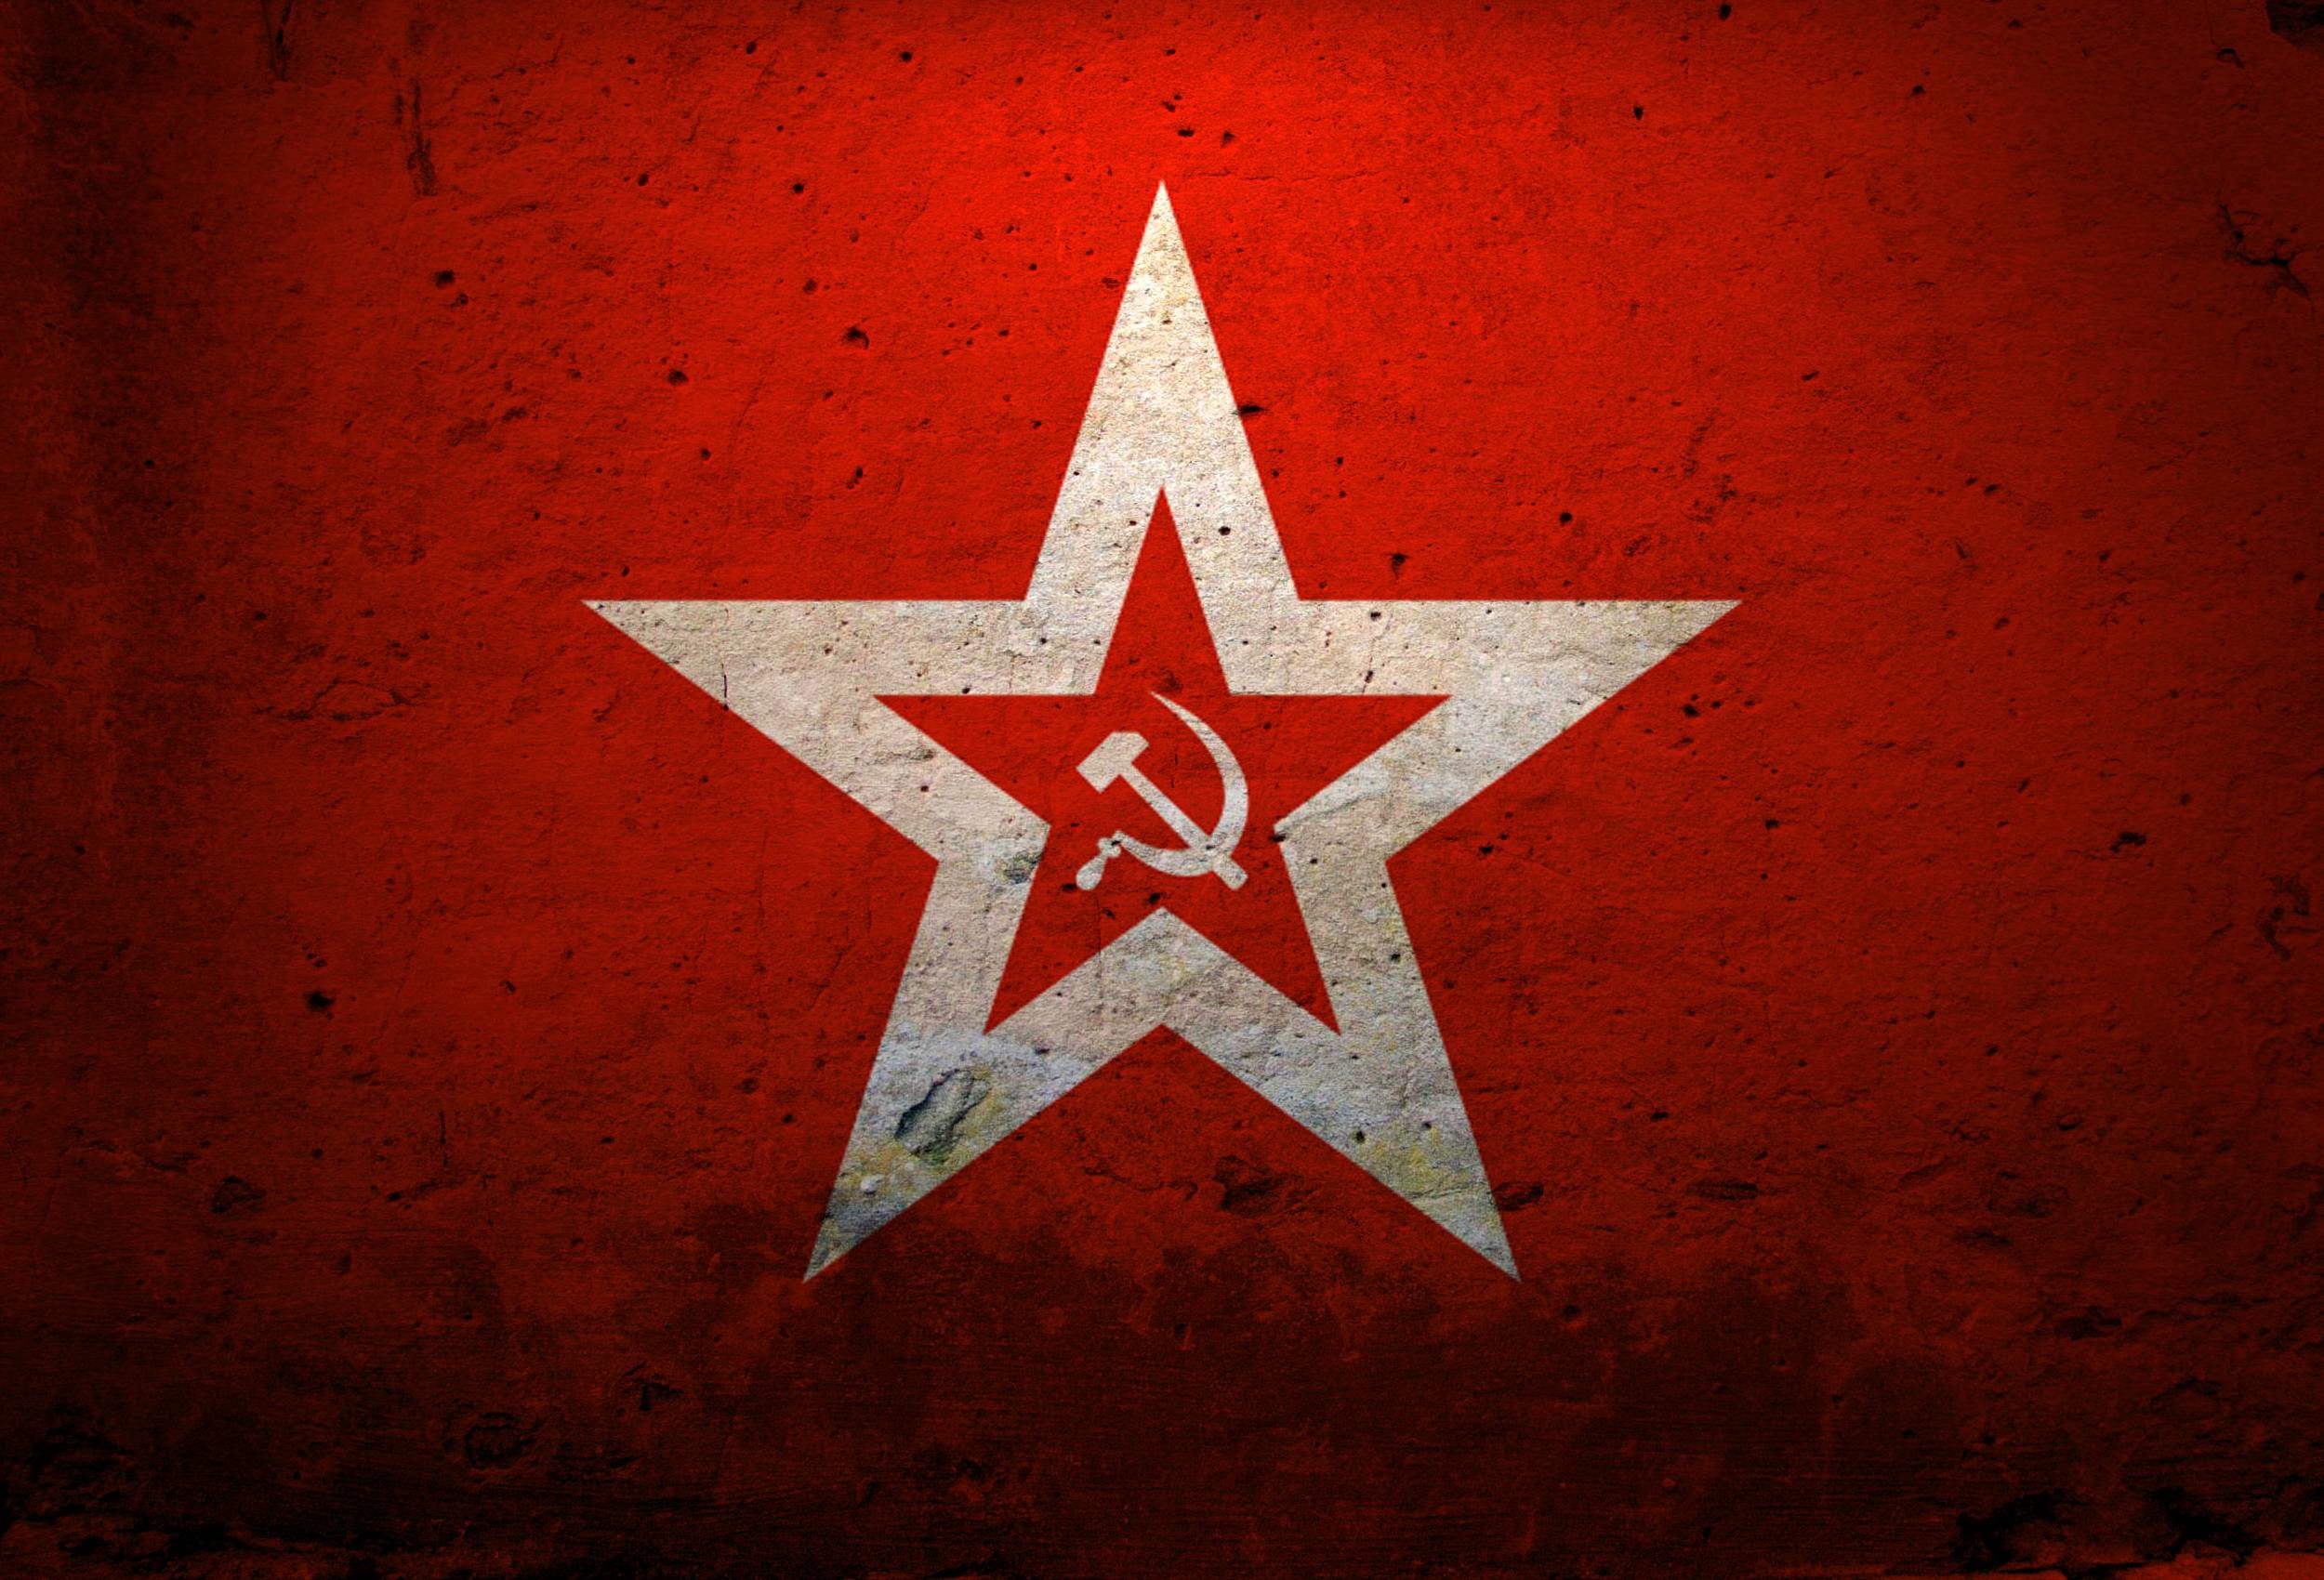 soviet union 1080P 2k 4k HD wallpapers backgrounds free download  Rare  Gallery